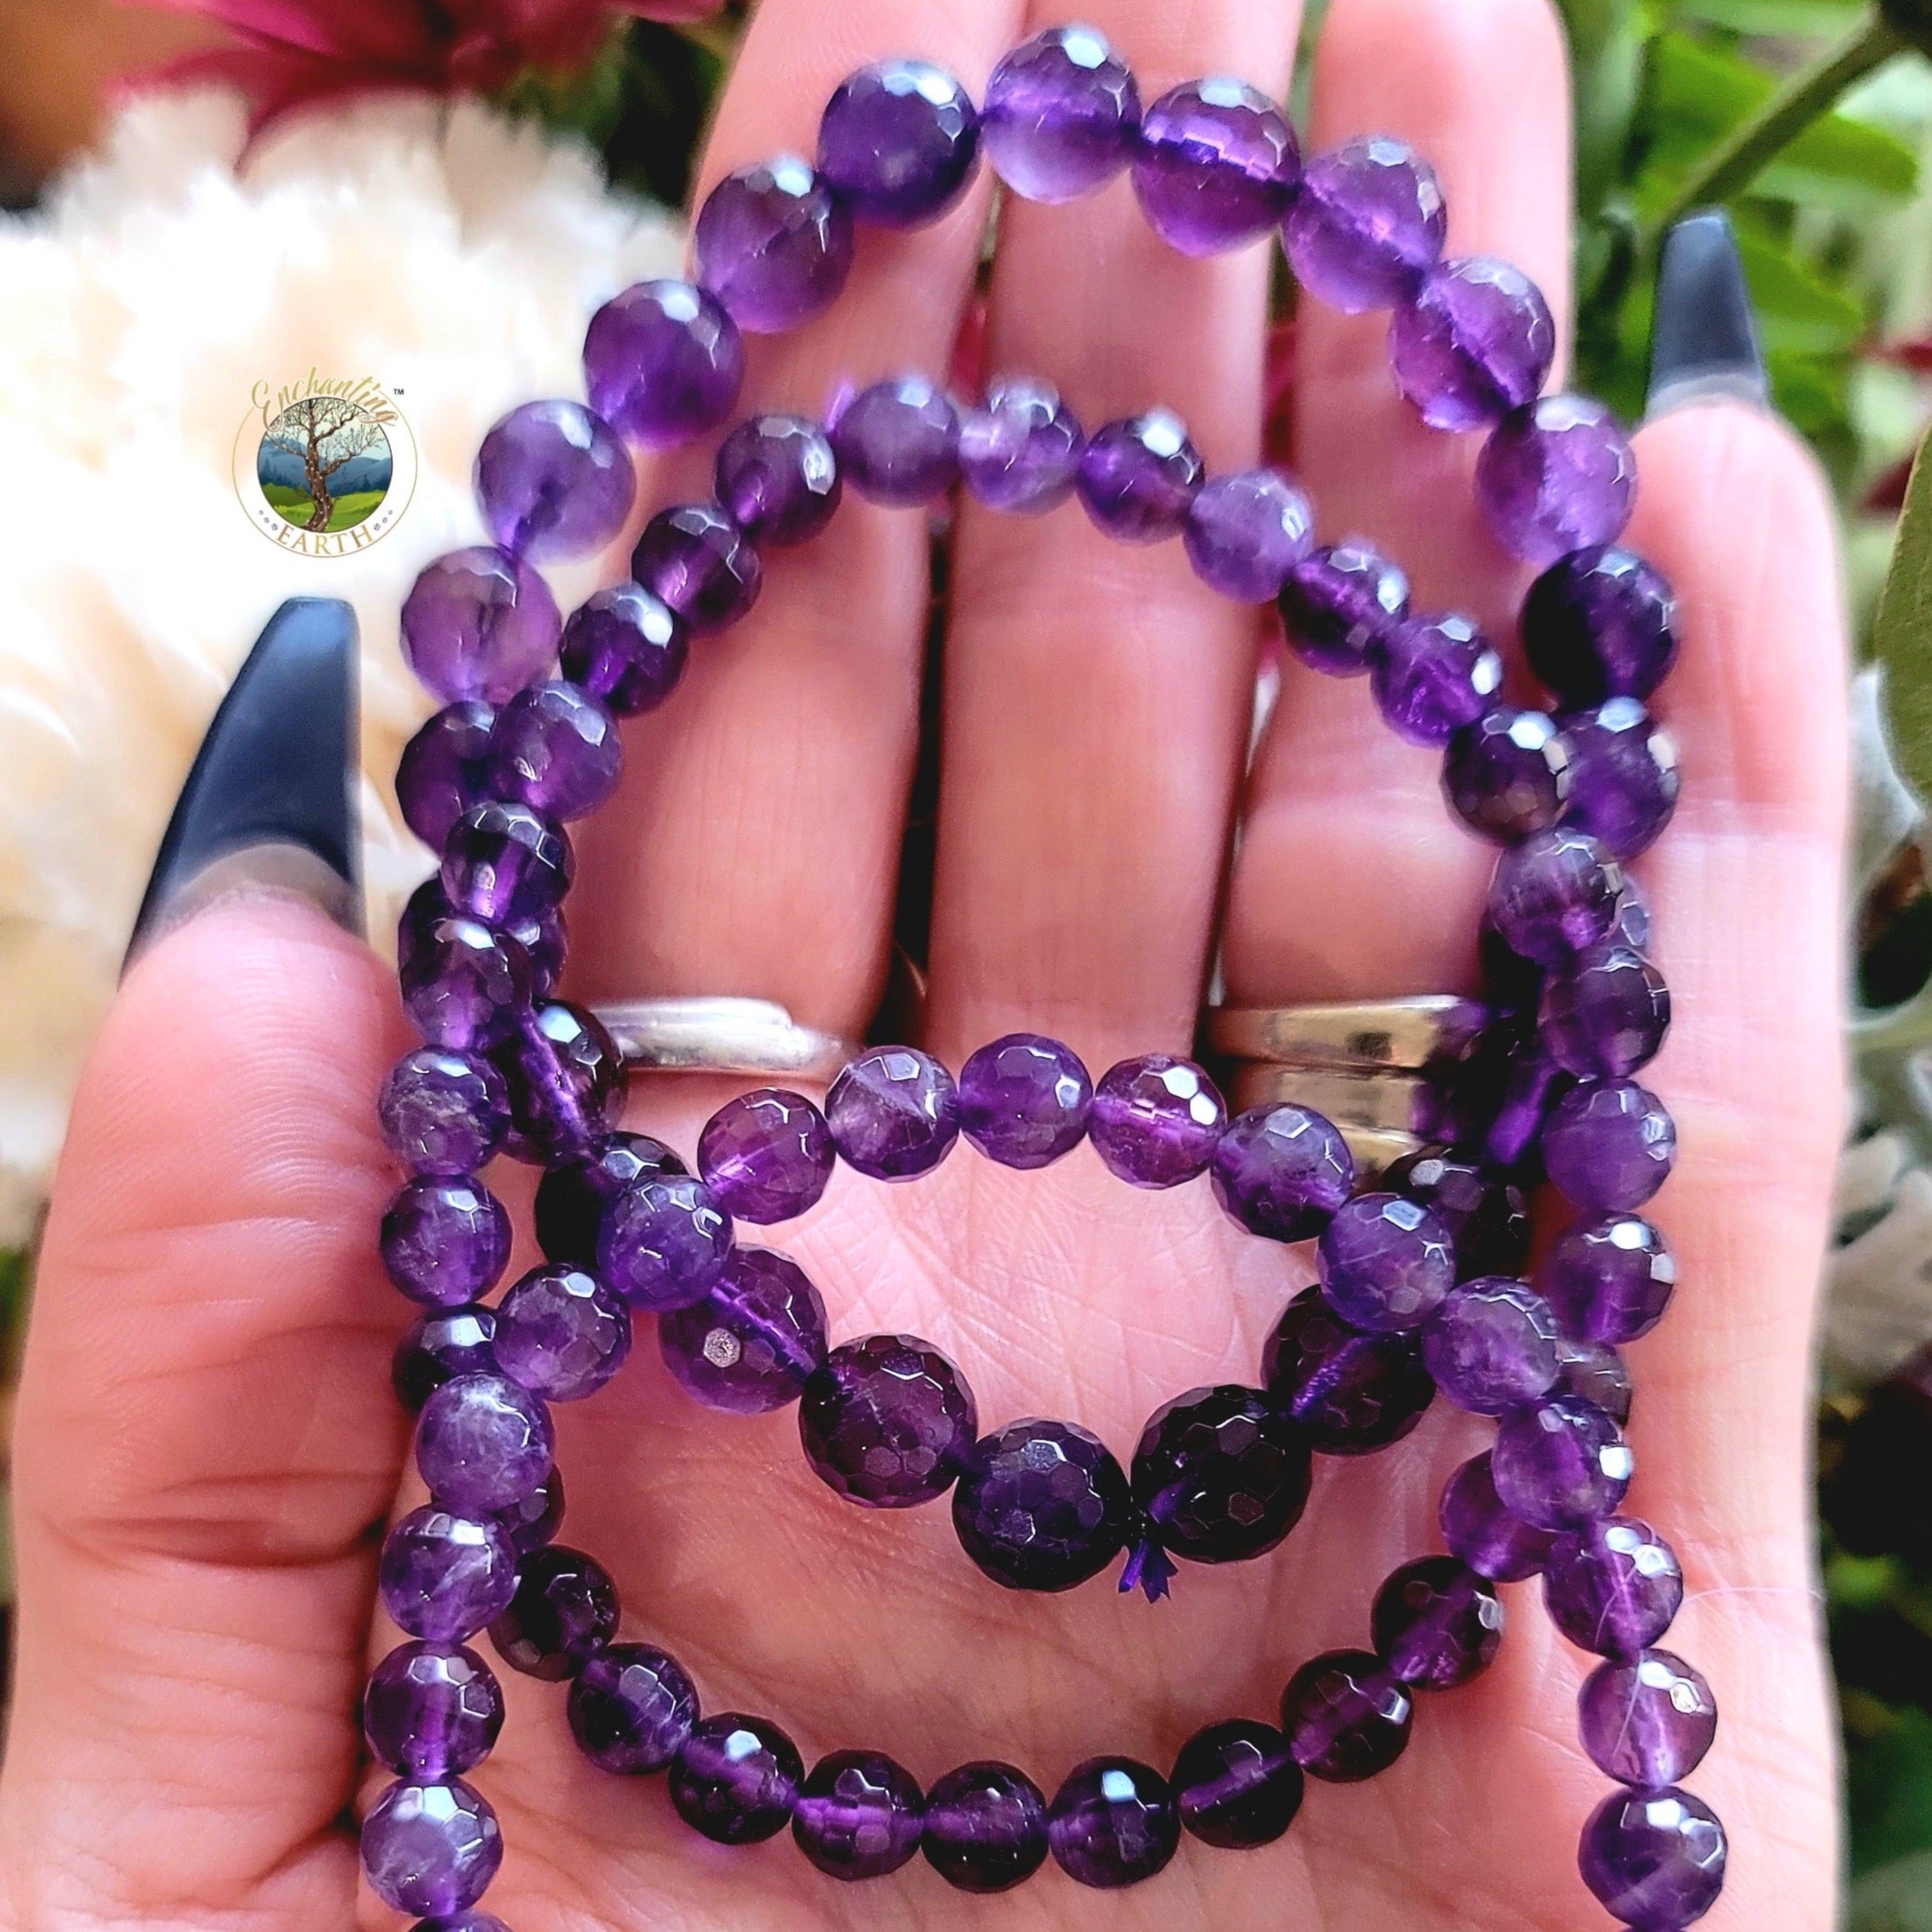 Amethyst Faceted Bracelet for Intuition, Connection with the Divine and Sobriety